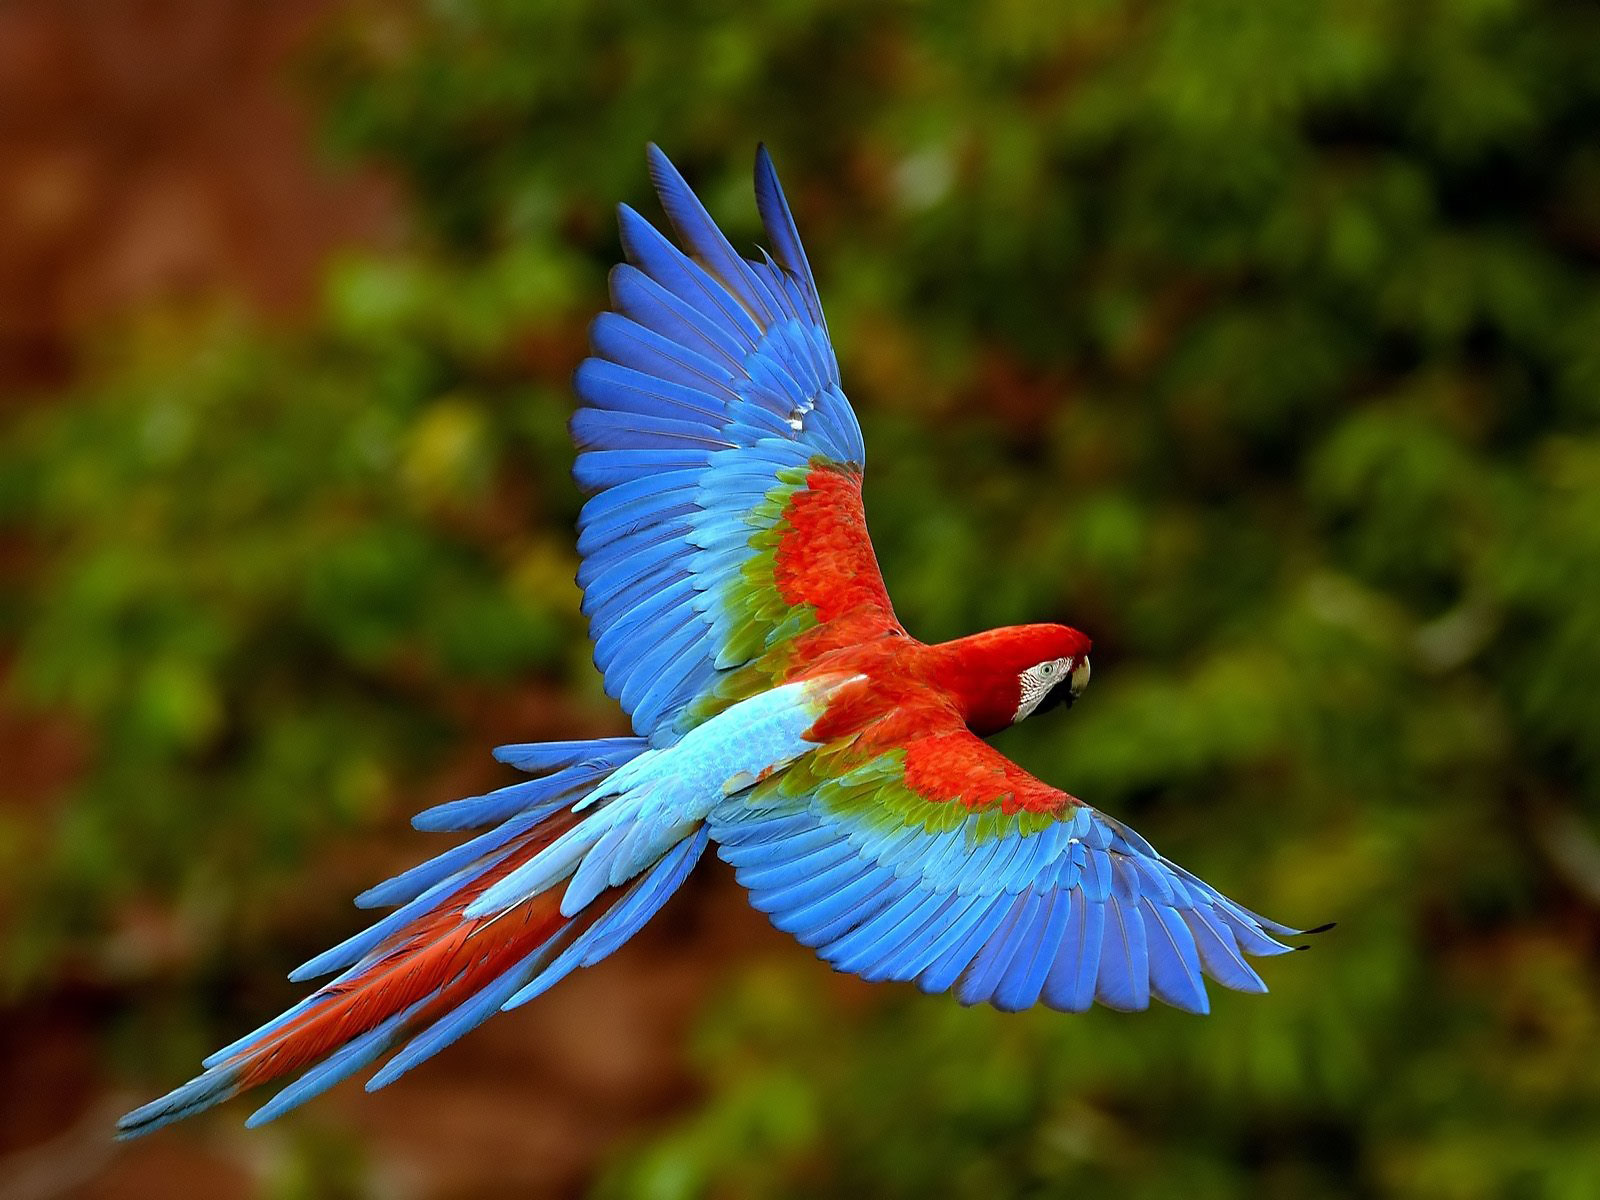 All Wallpapers Parrot Hd Wallpapers 1 1600x1200